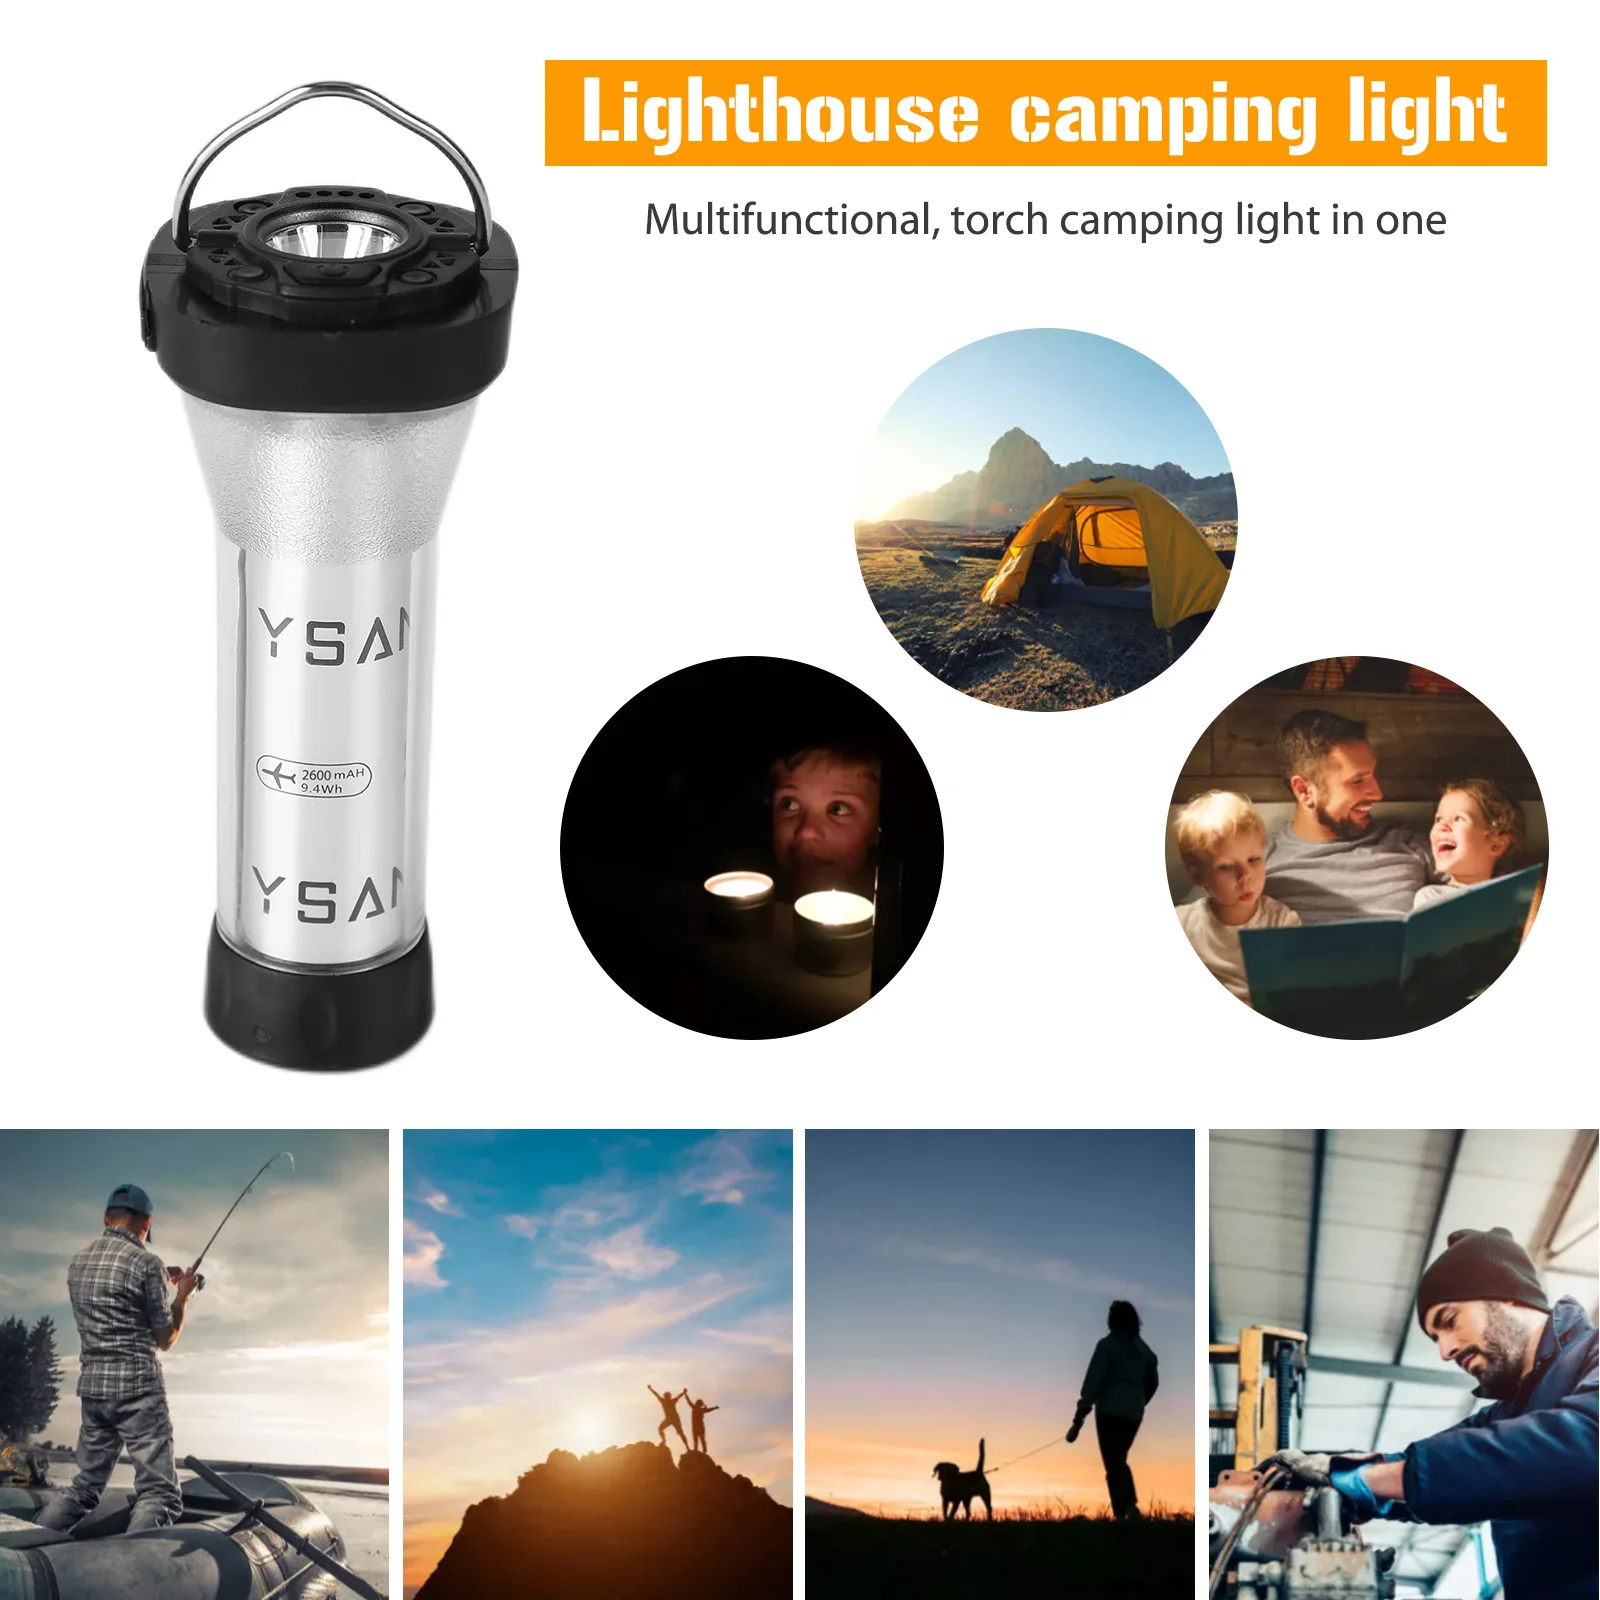 

LED Camping Flashlights Multifunctional Mini Car Repair Lamps Outdoor Adventure Portable Night Torches Lighting Gadgets